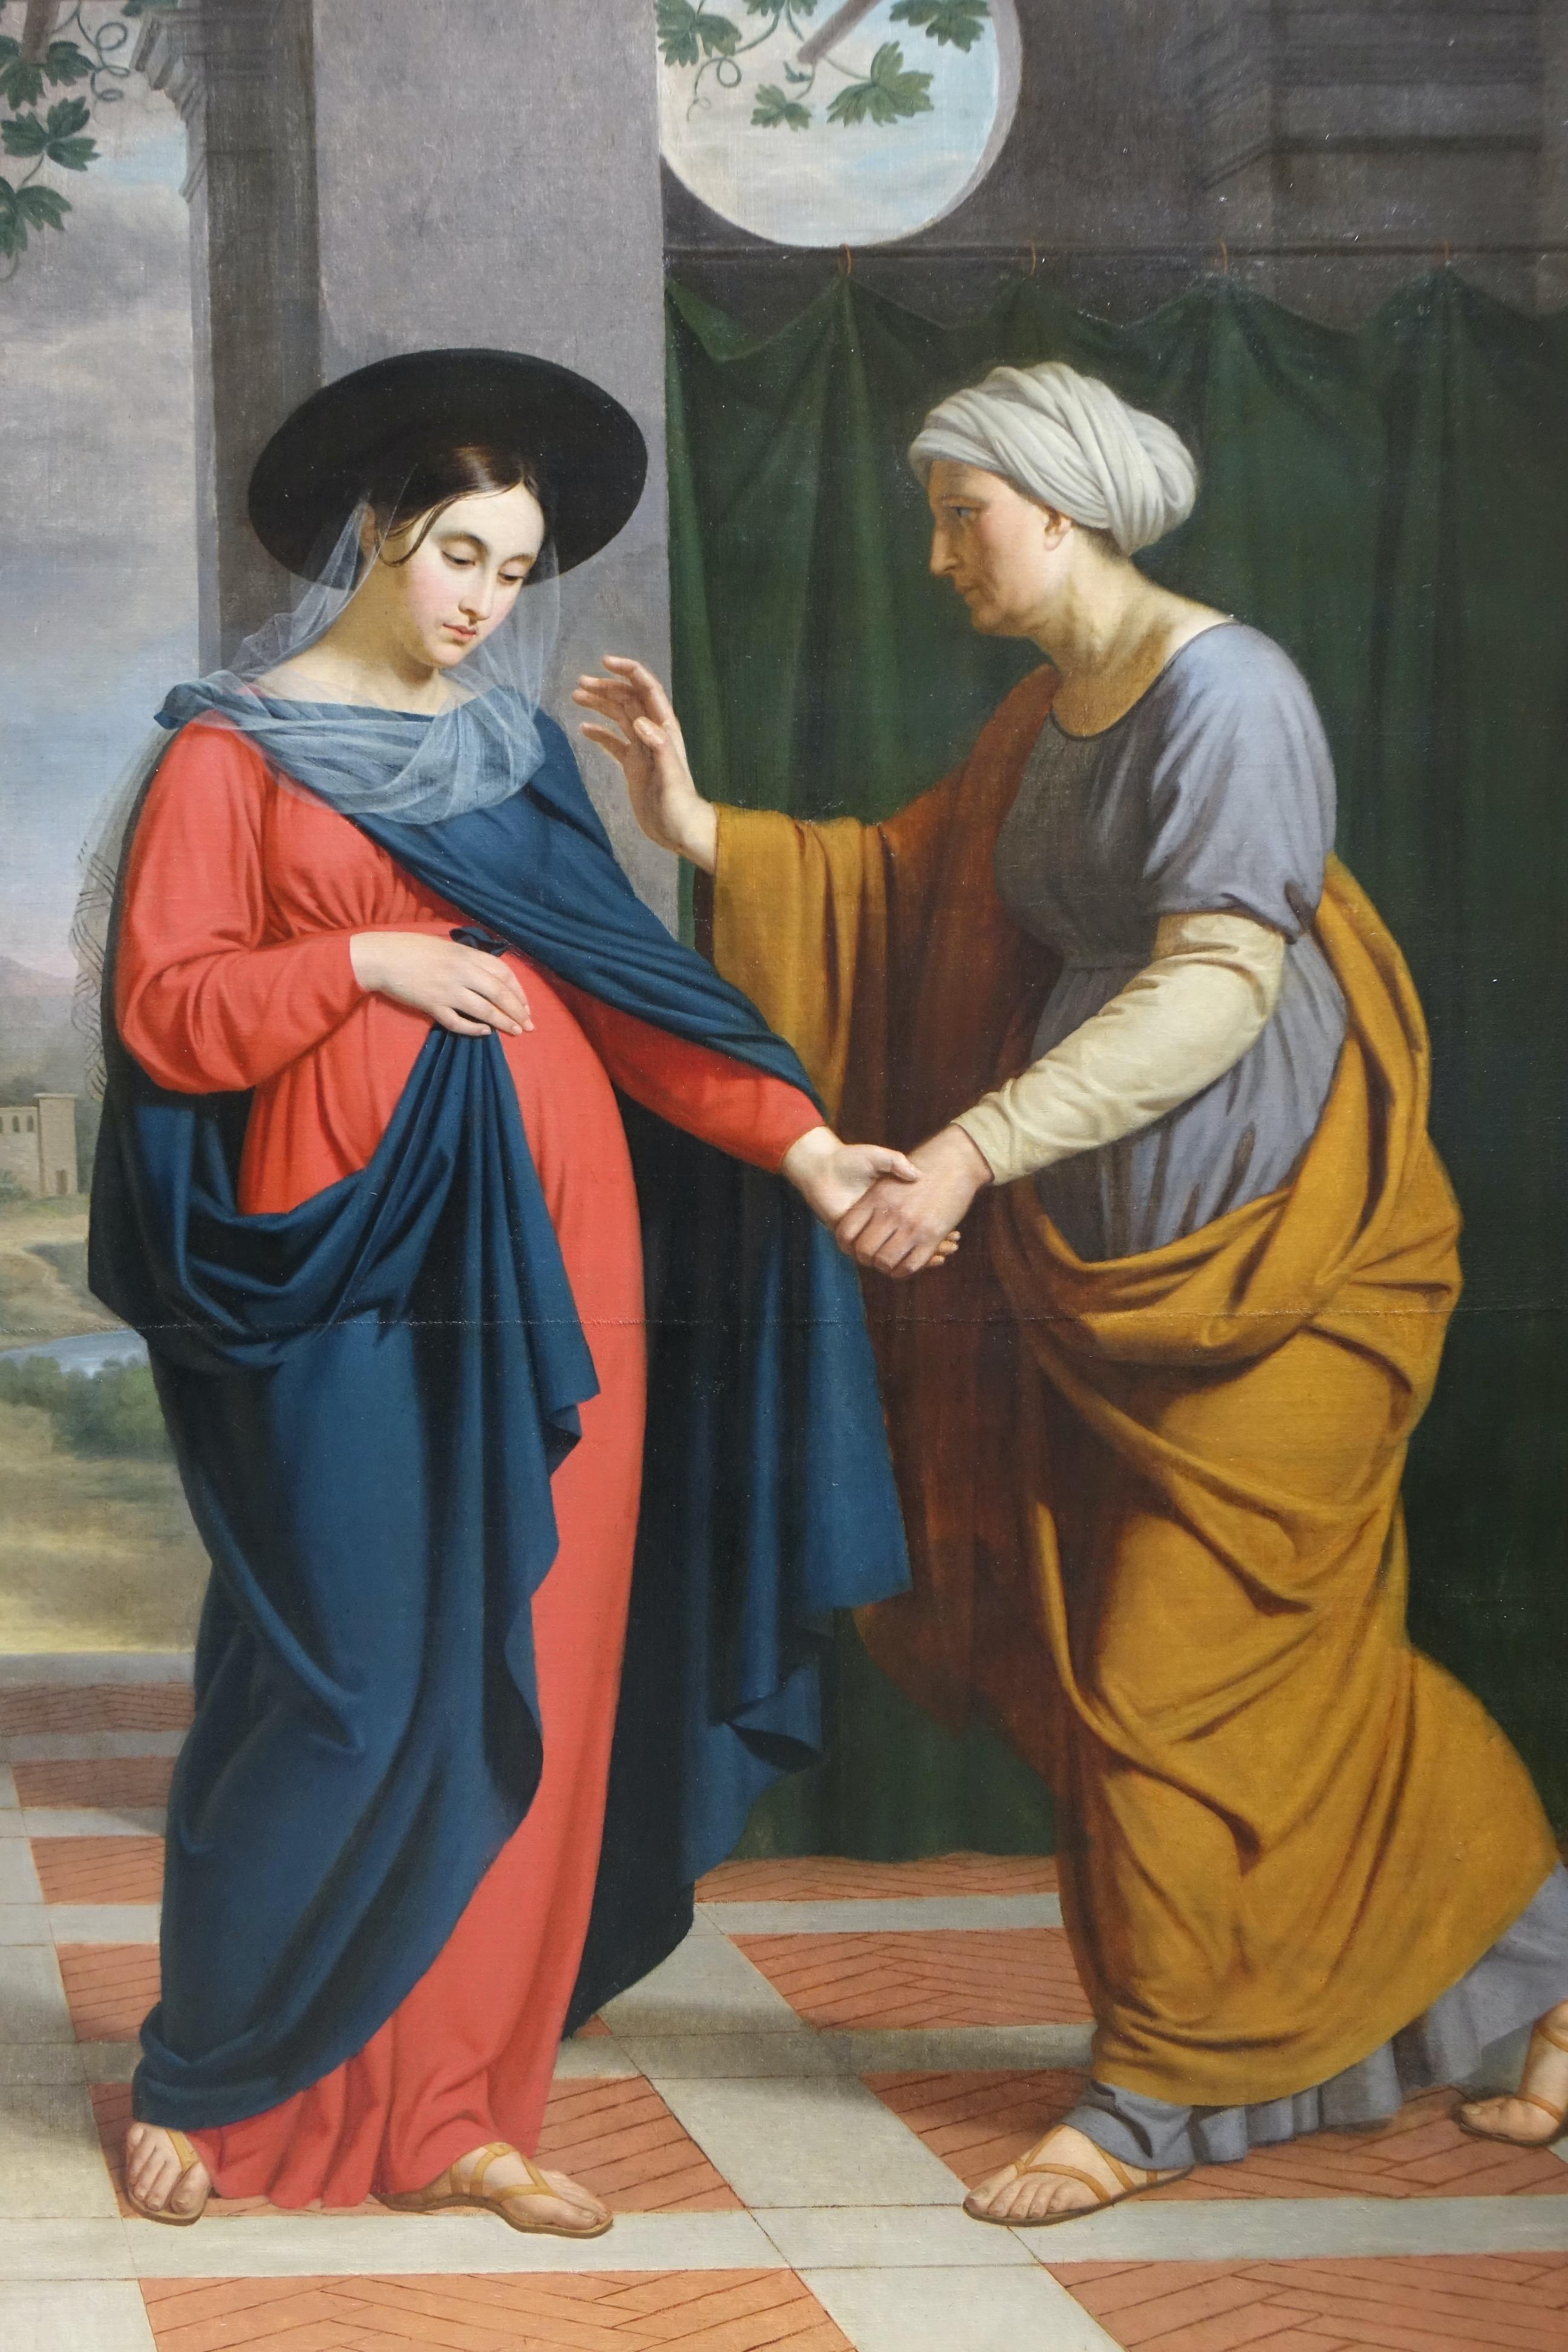 The Visitation”. Oil on canvas sewn in three very large parts (3.03m x 1.81m) representing the Visitation of Elizabeth to Mary. The Visitation commemorates an episode from the Gospel according to Luke (Lk 1:39-45): the visit that Mary, pregnant with